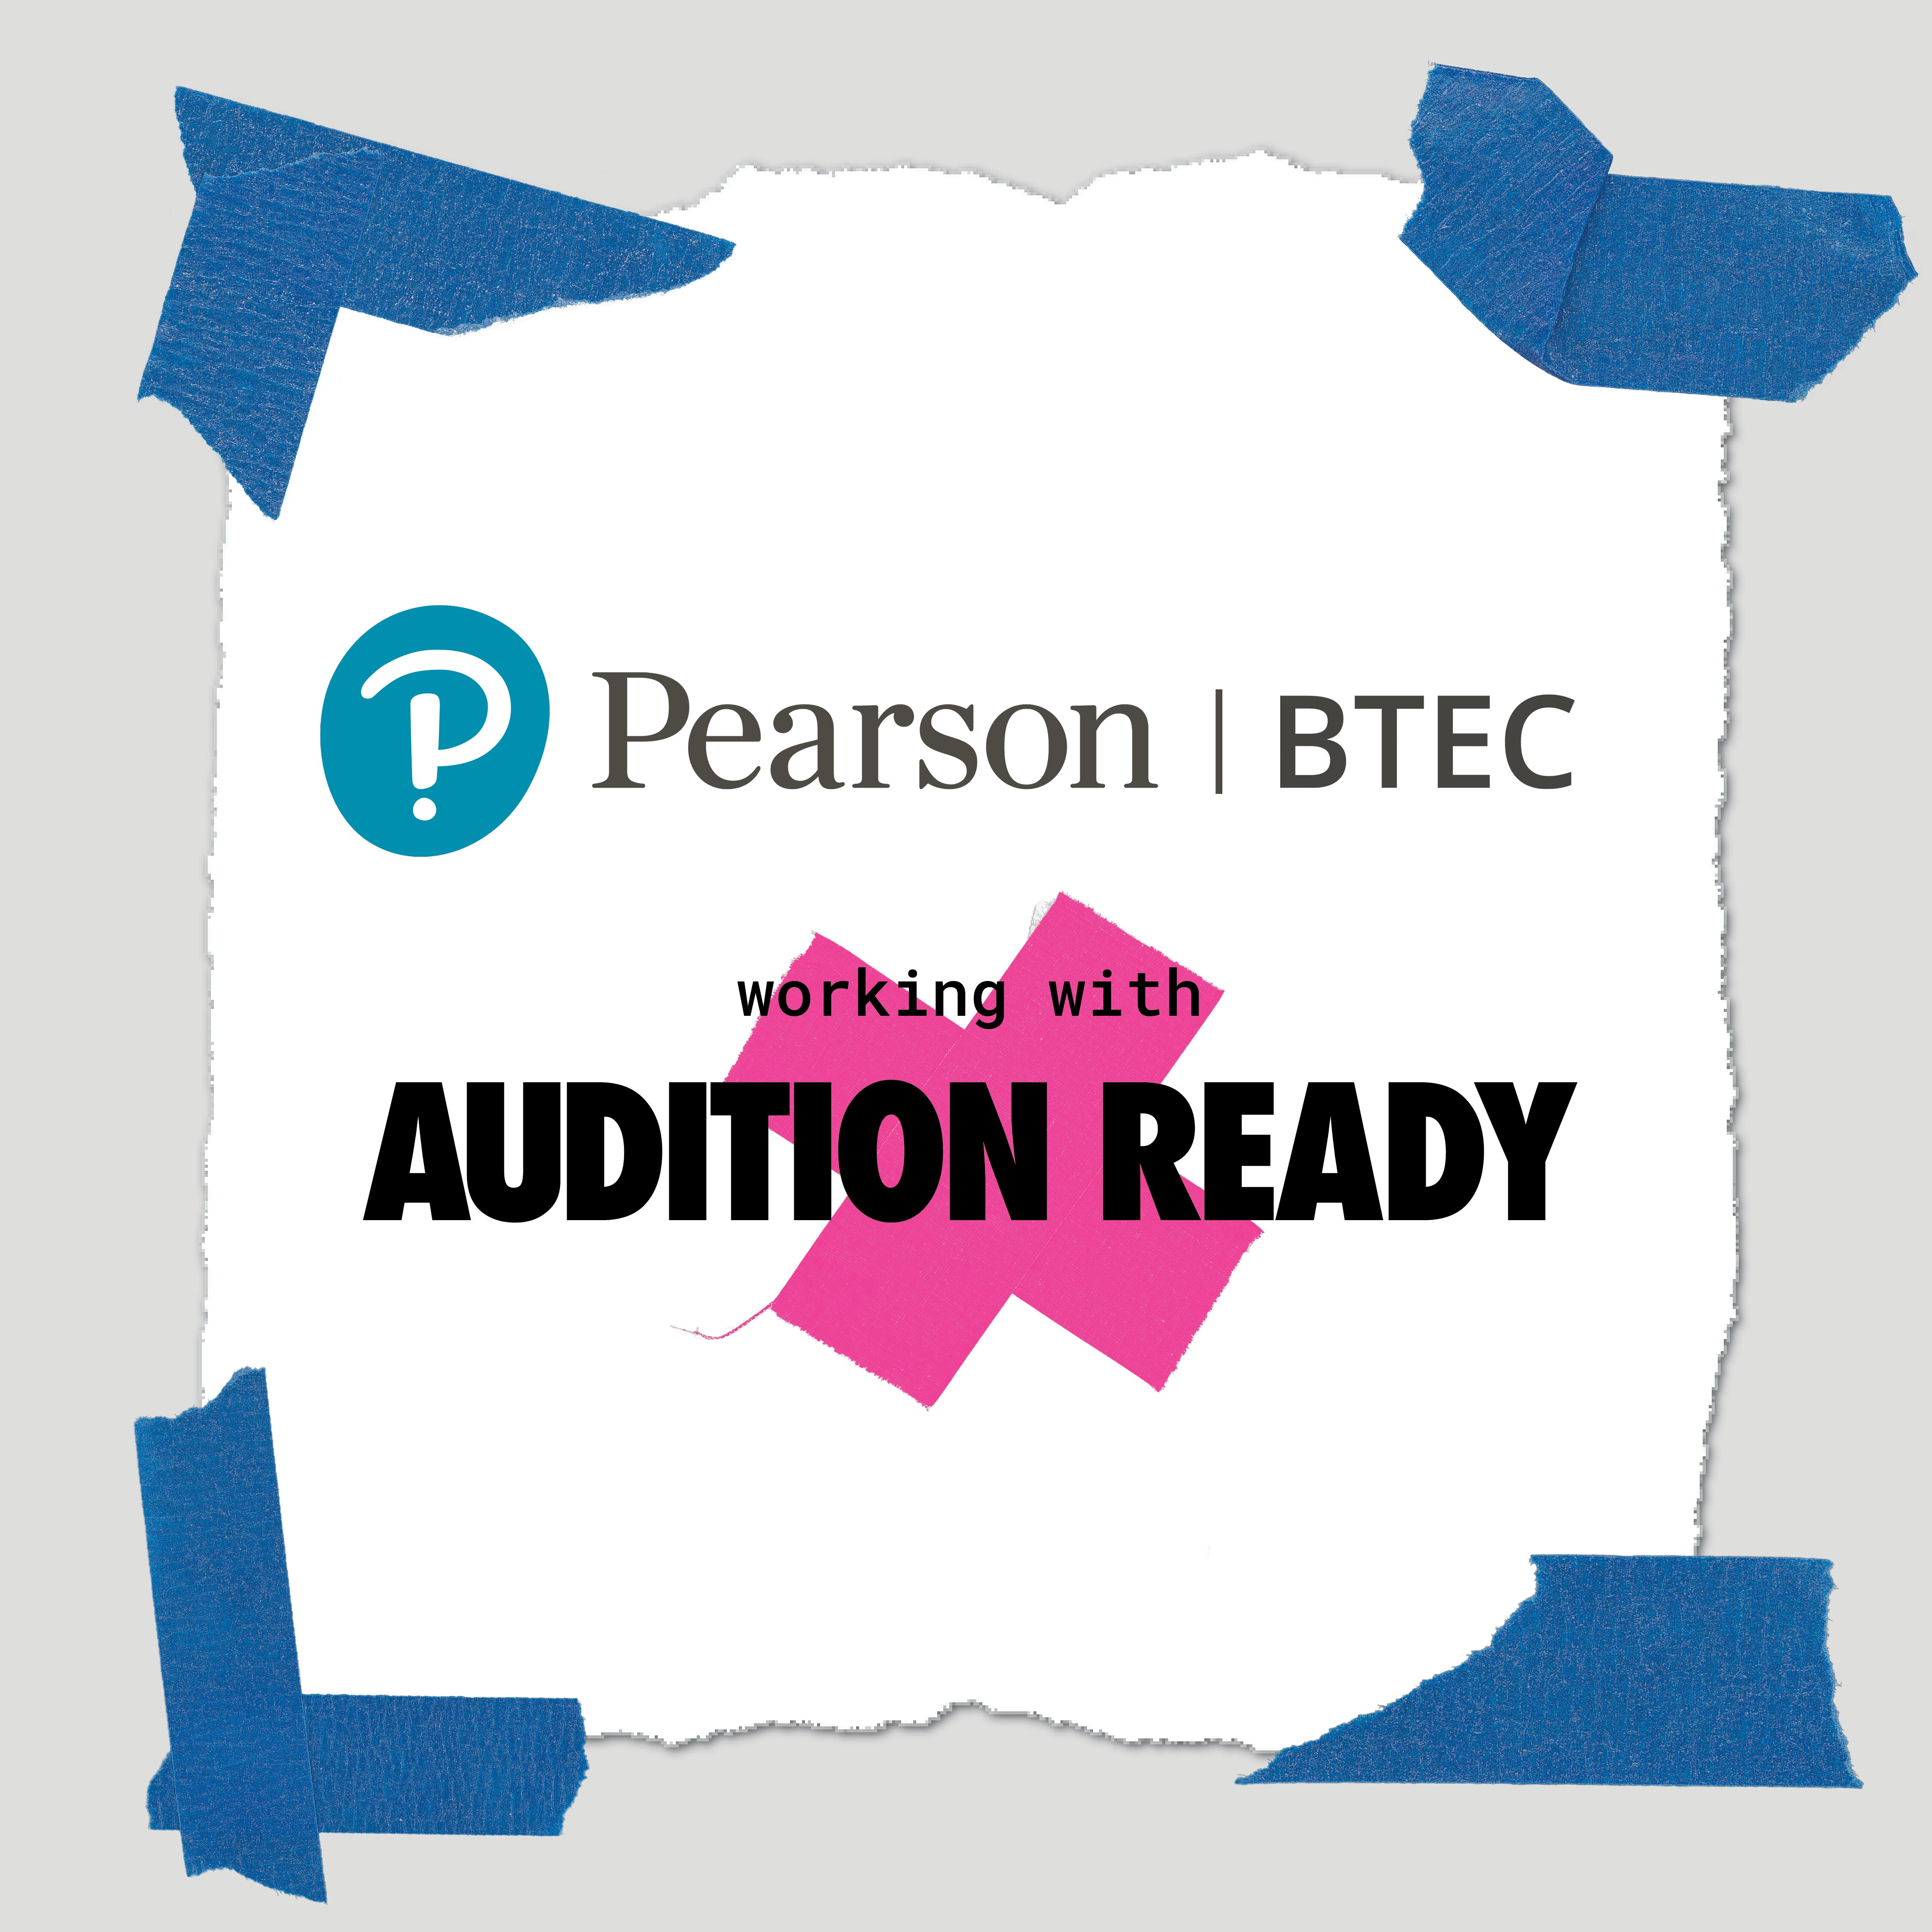 Pearson BTEC working with Audition Ready